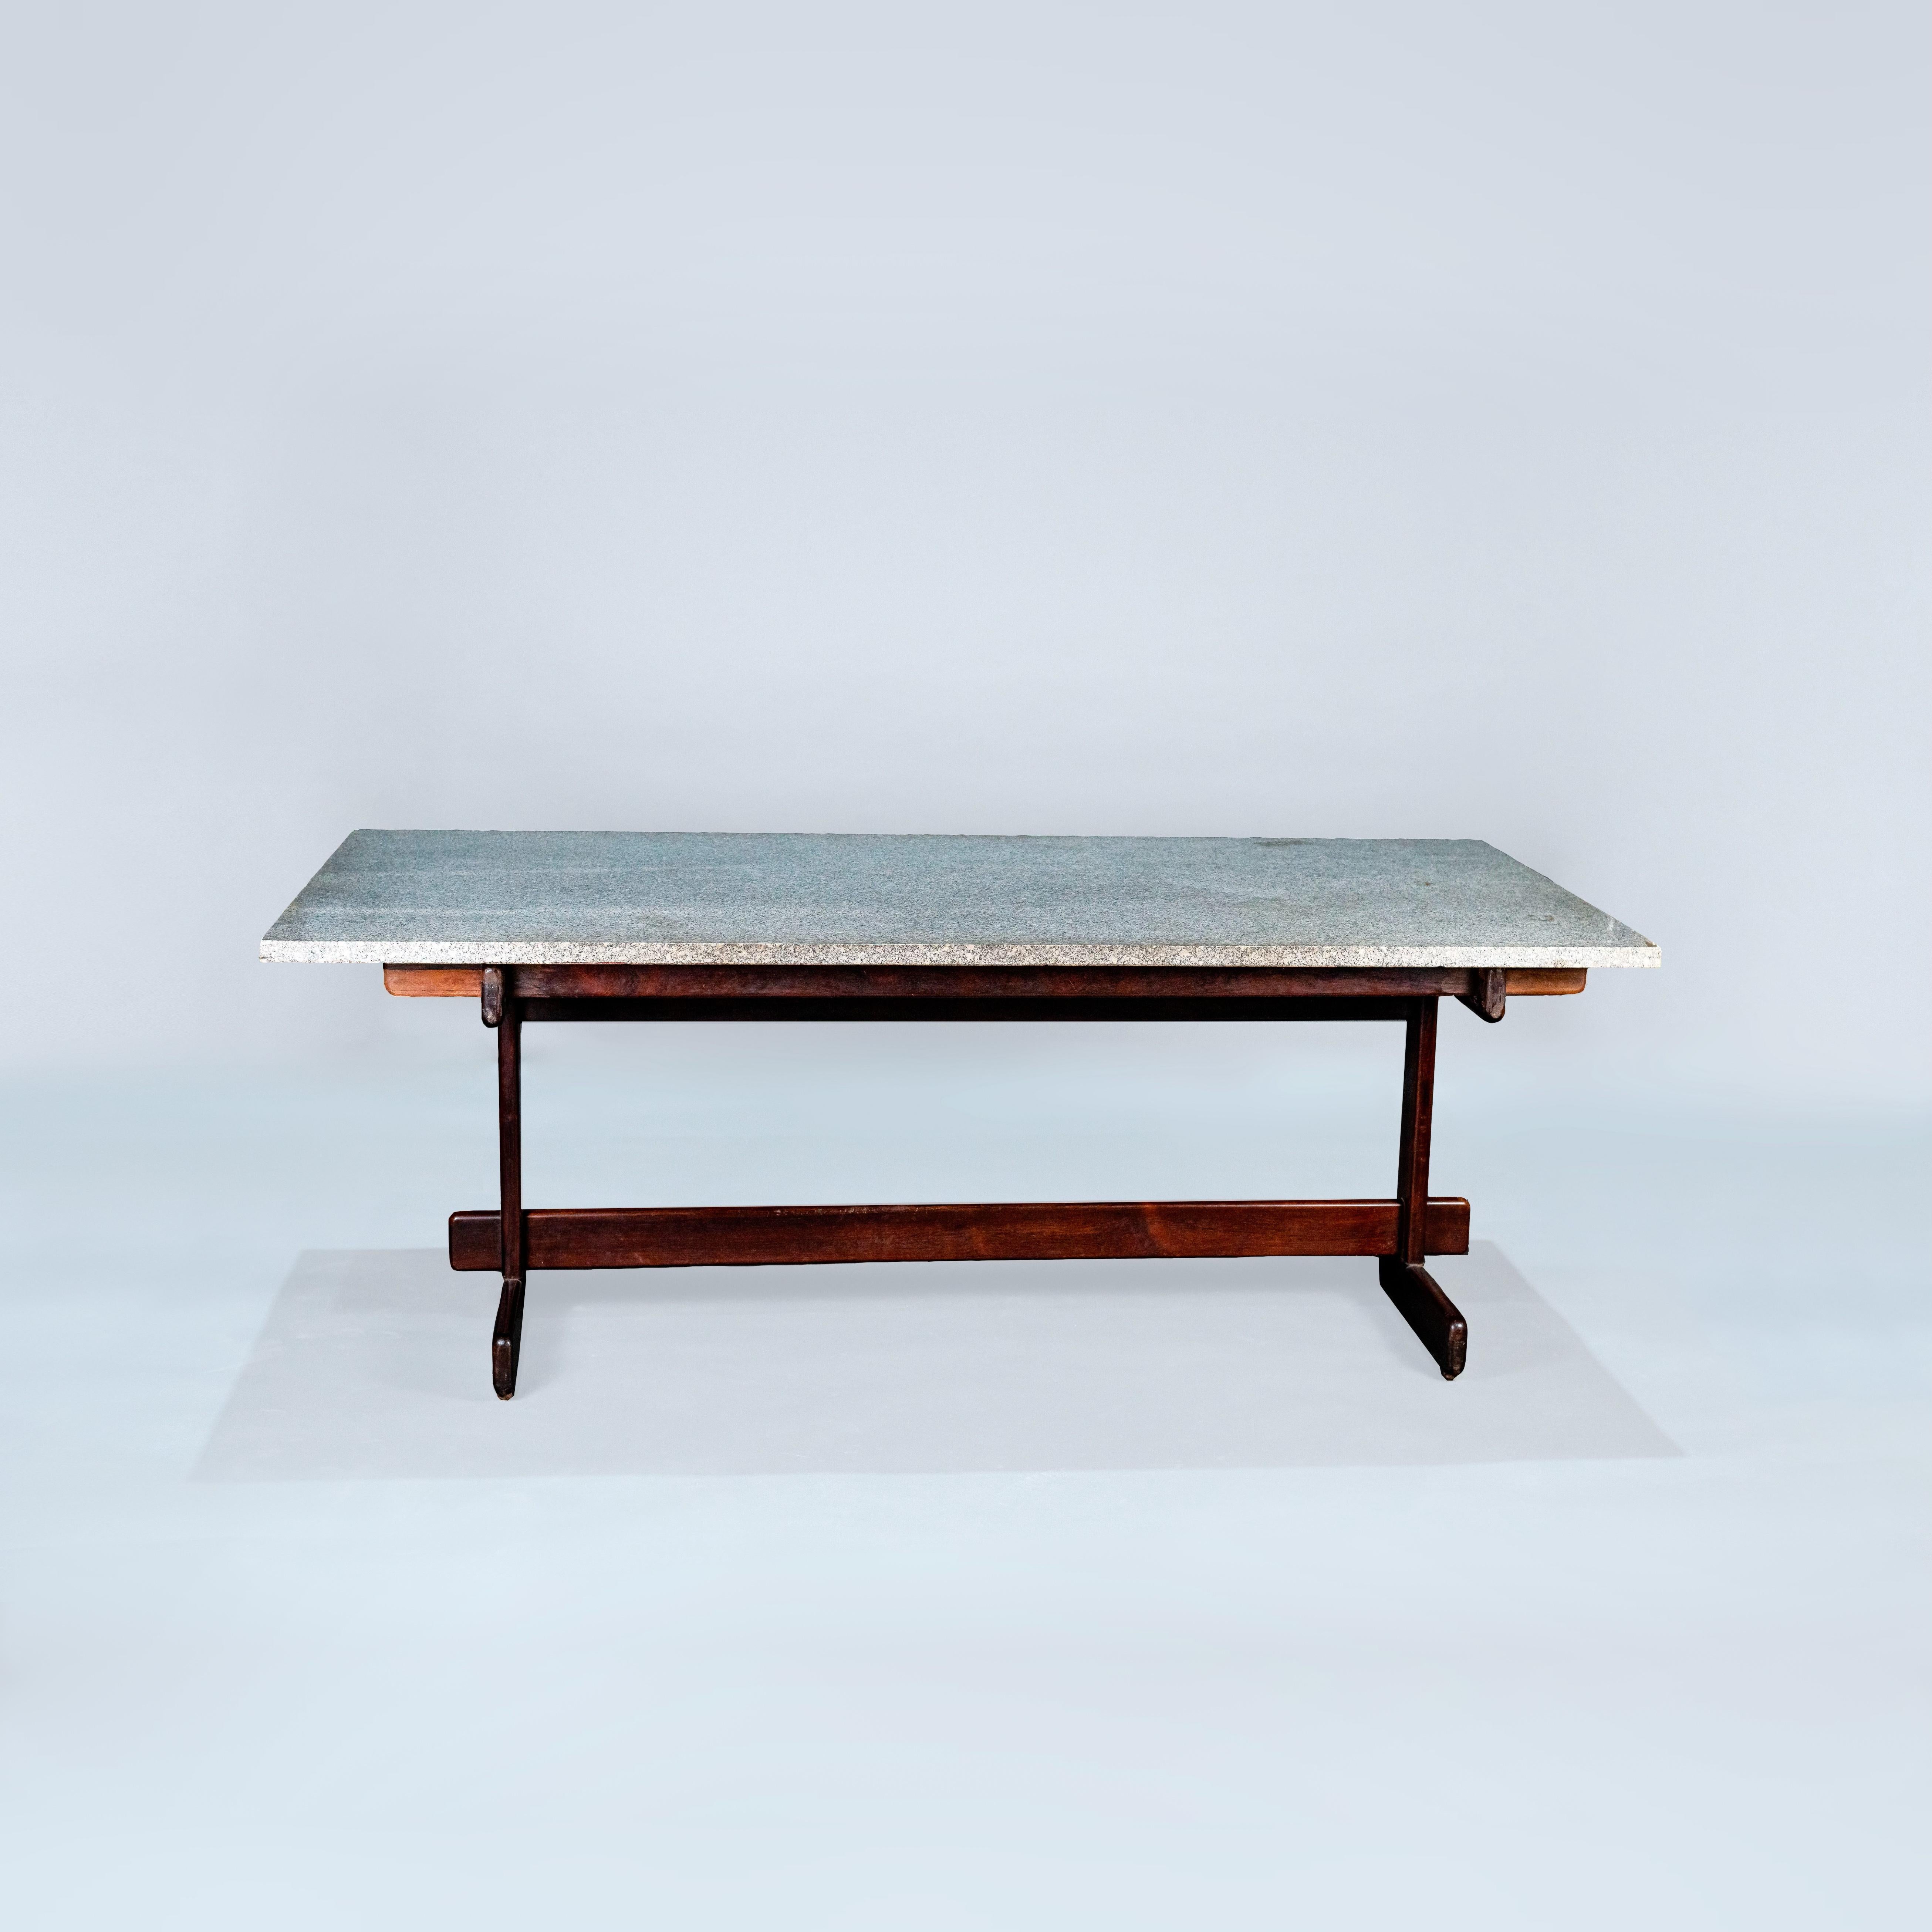 This elegant dining table from the Moveis Cantu workshop, dating from 1968, is a remarkable piece that combines timeless style and exceptional artisanal quality.

The table proudly bears the original label of the workshop, testifying to its